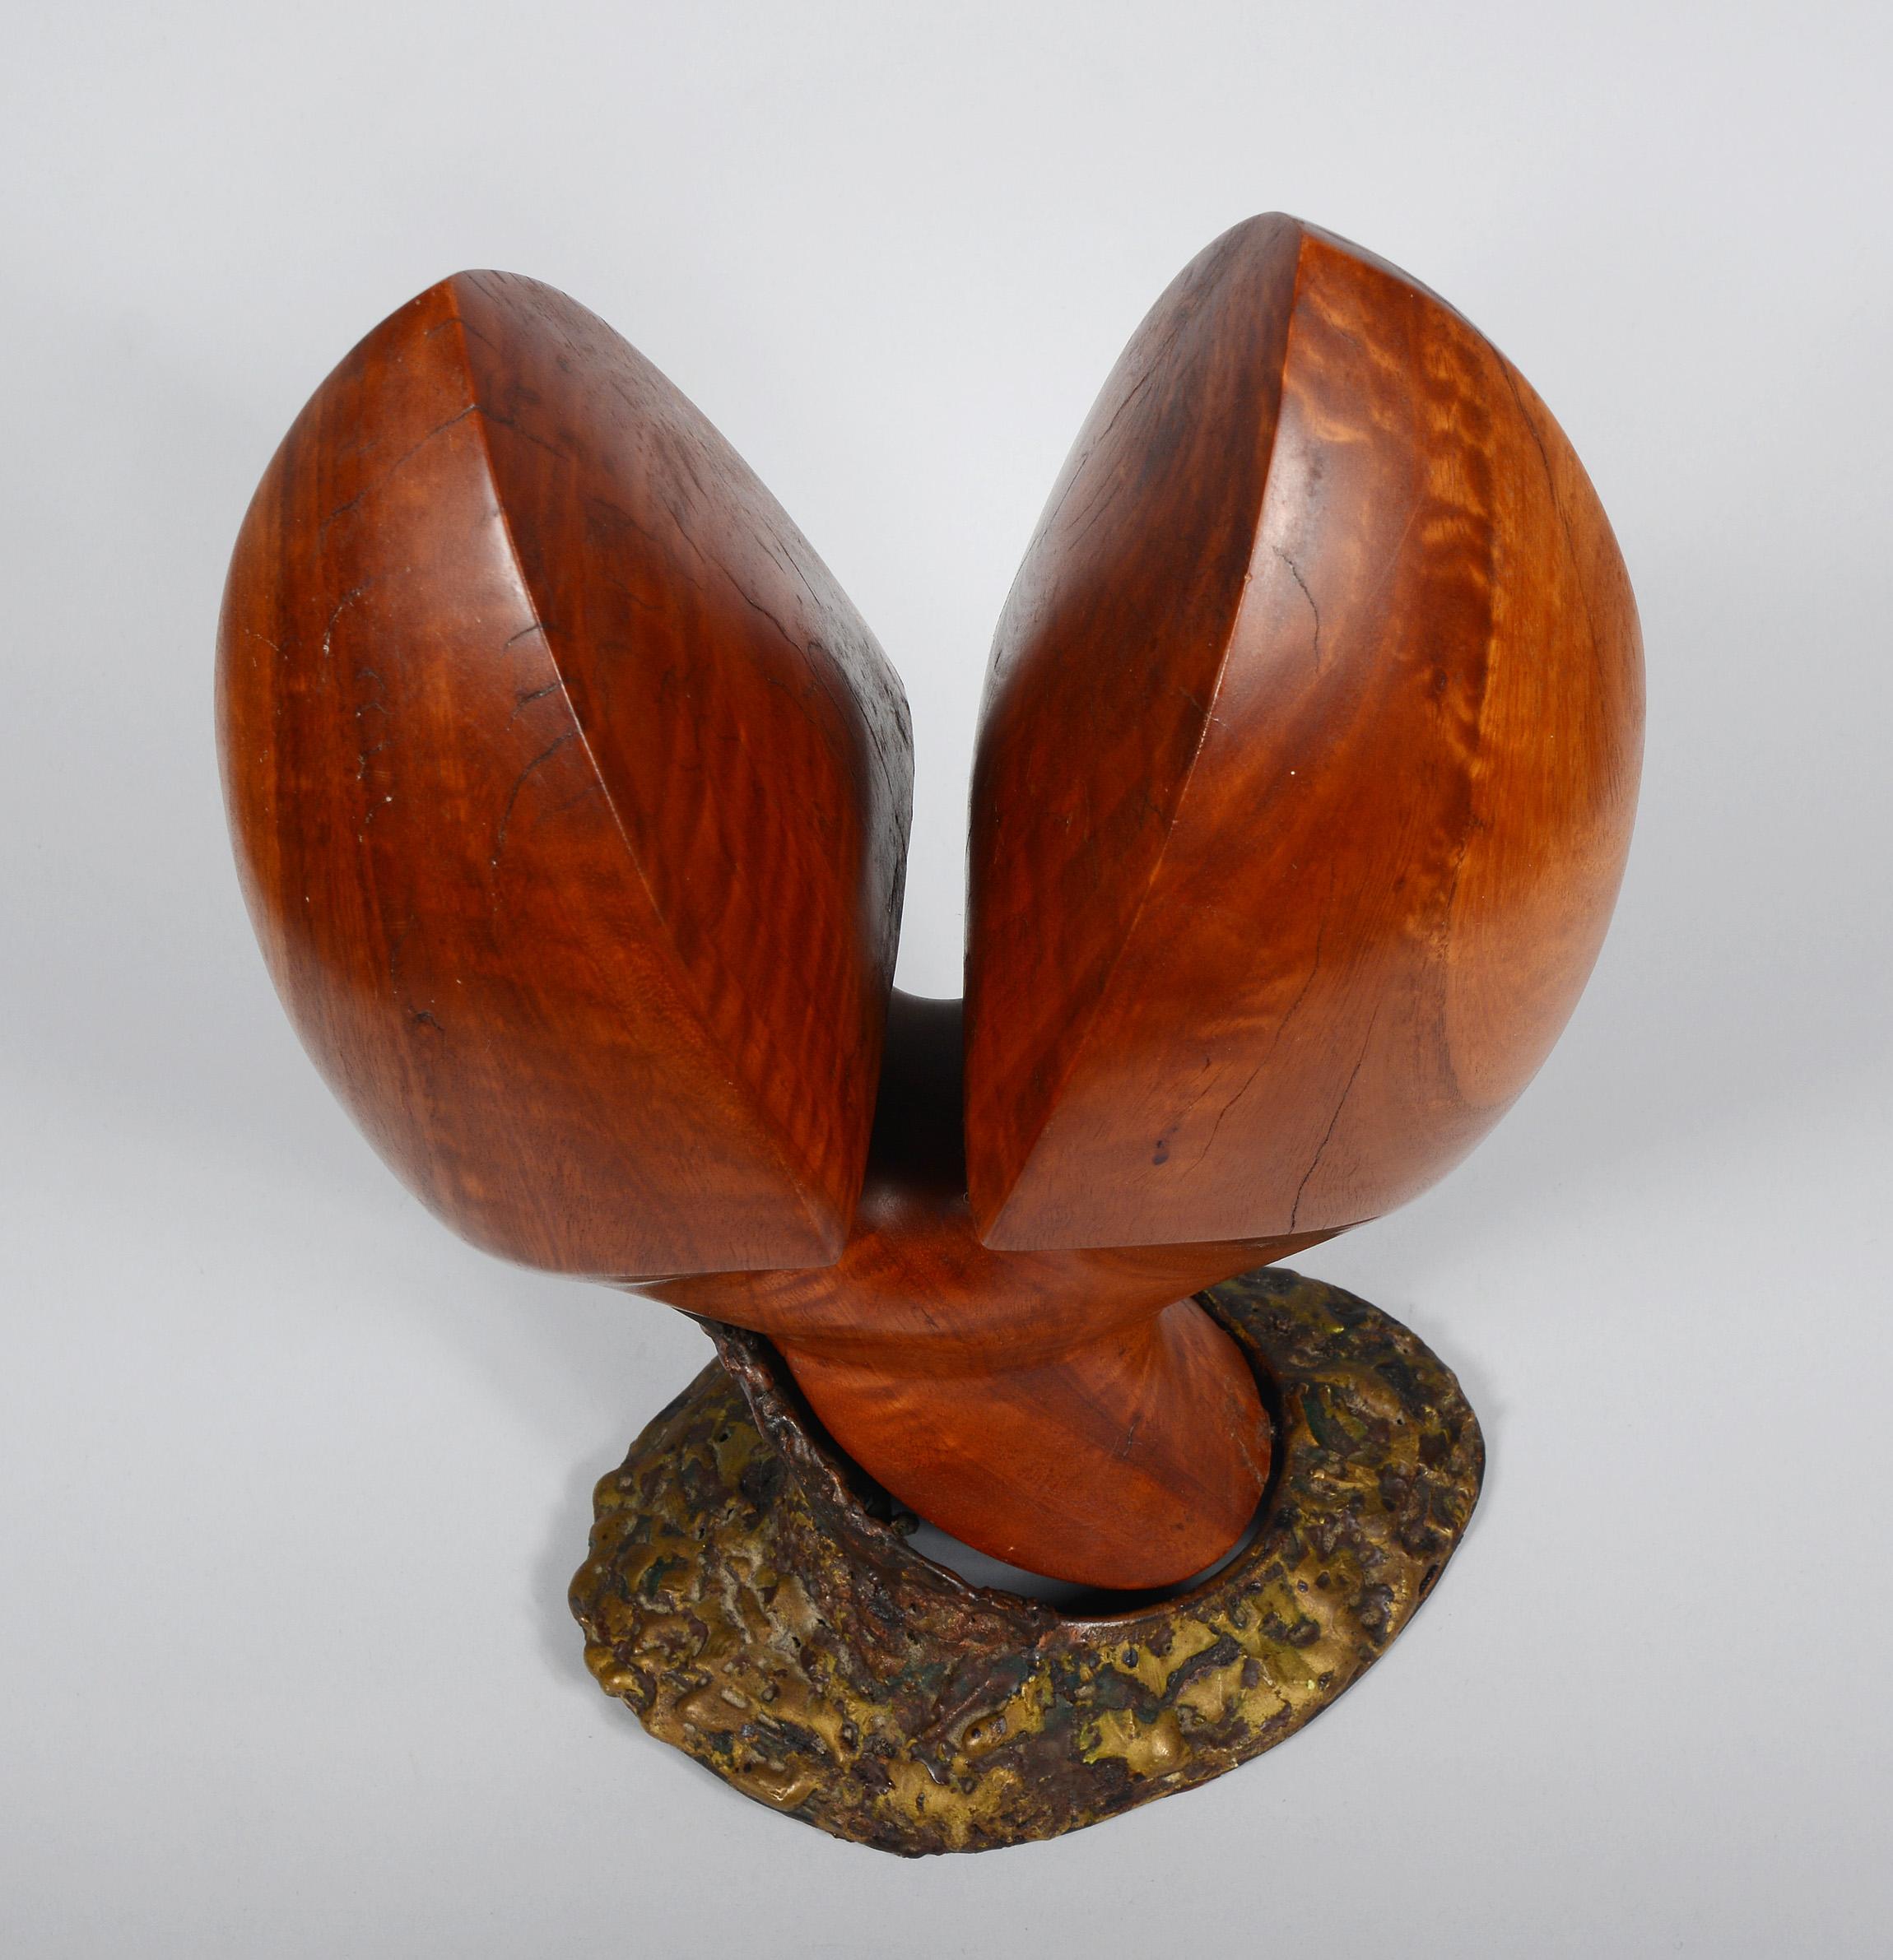 Modernist Abstract Wood and Metal Tabletop Sculpture In Good Condition For Sale In San Mateo, CA